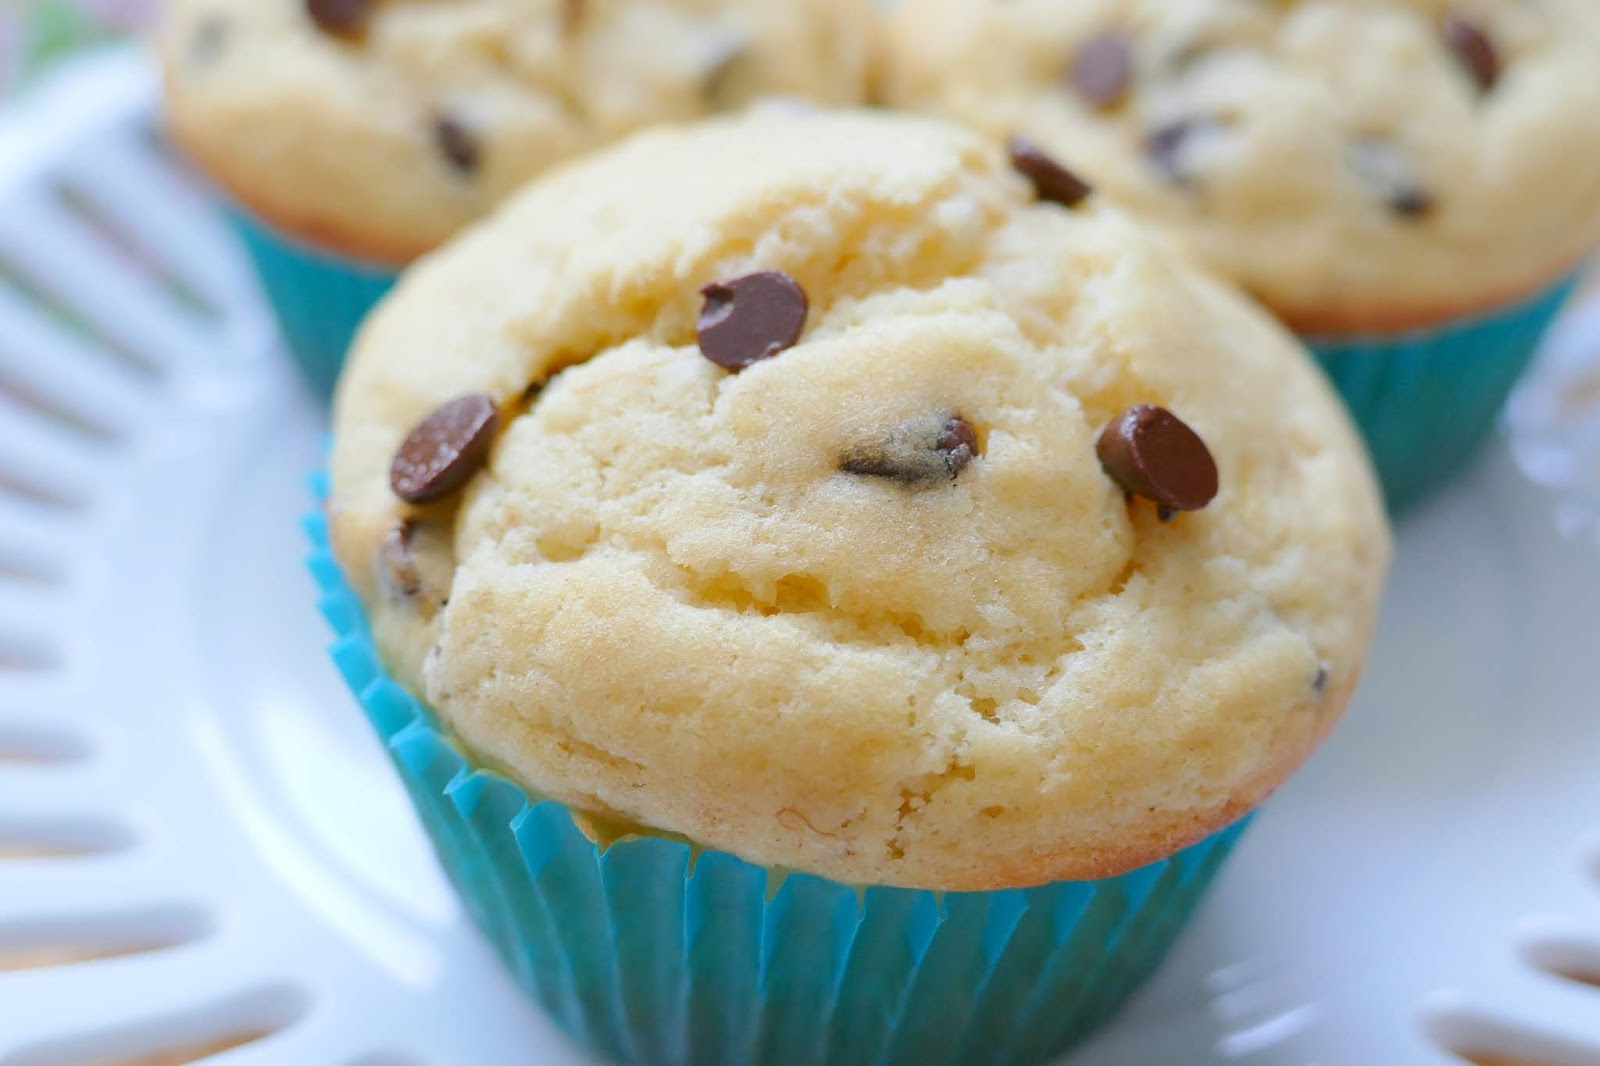 Banana Mini Chocolate Chip Muffins Recipe from Hot Eats and Cool Reads! These tasty muffins with little bites of chocolate chips are perfect for breakfast, the lunchbox, picnics or snack!